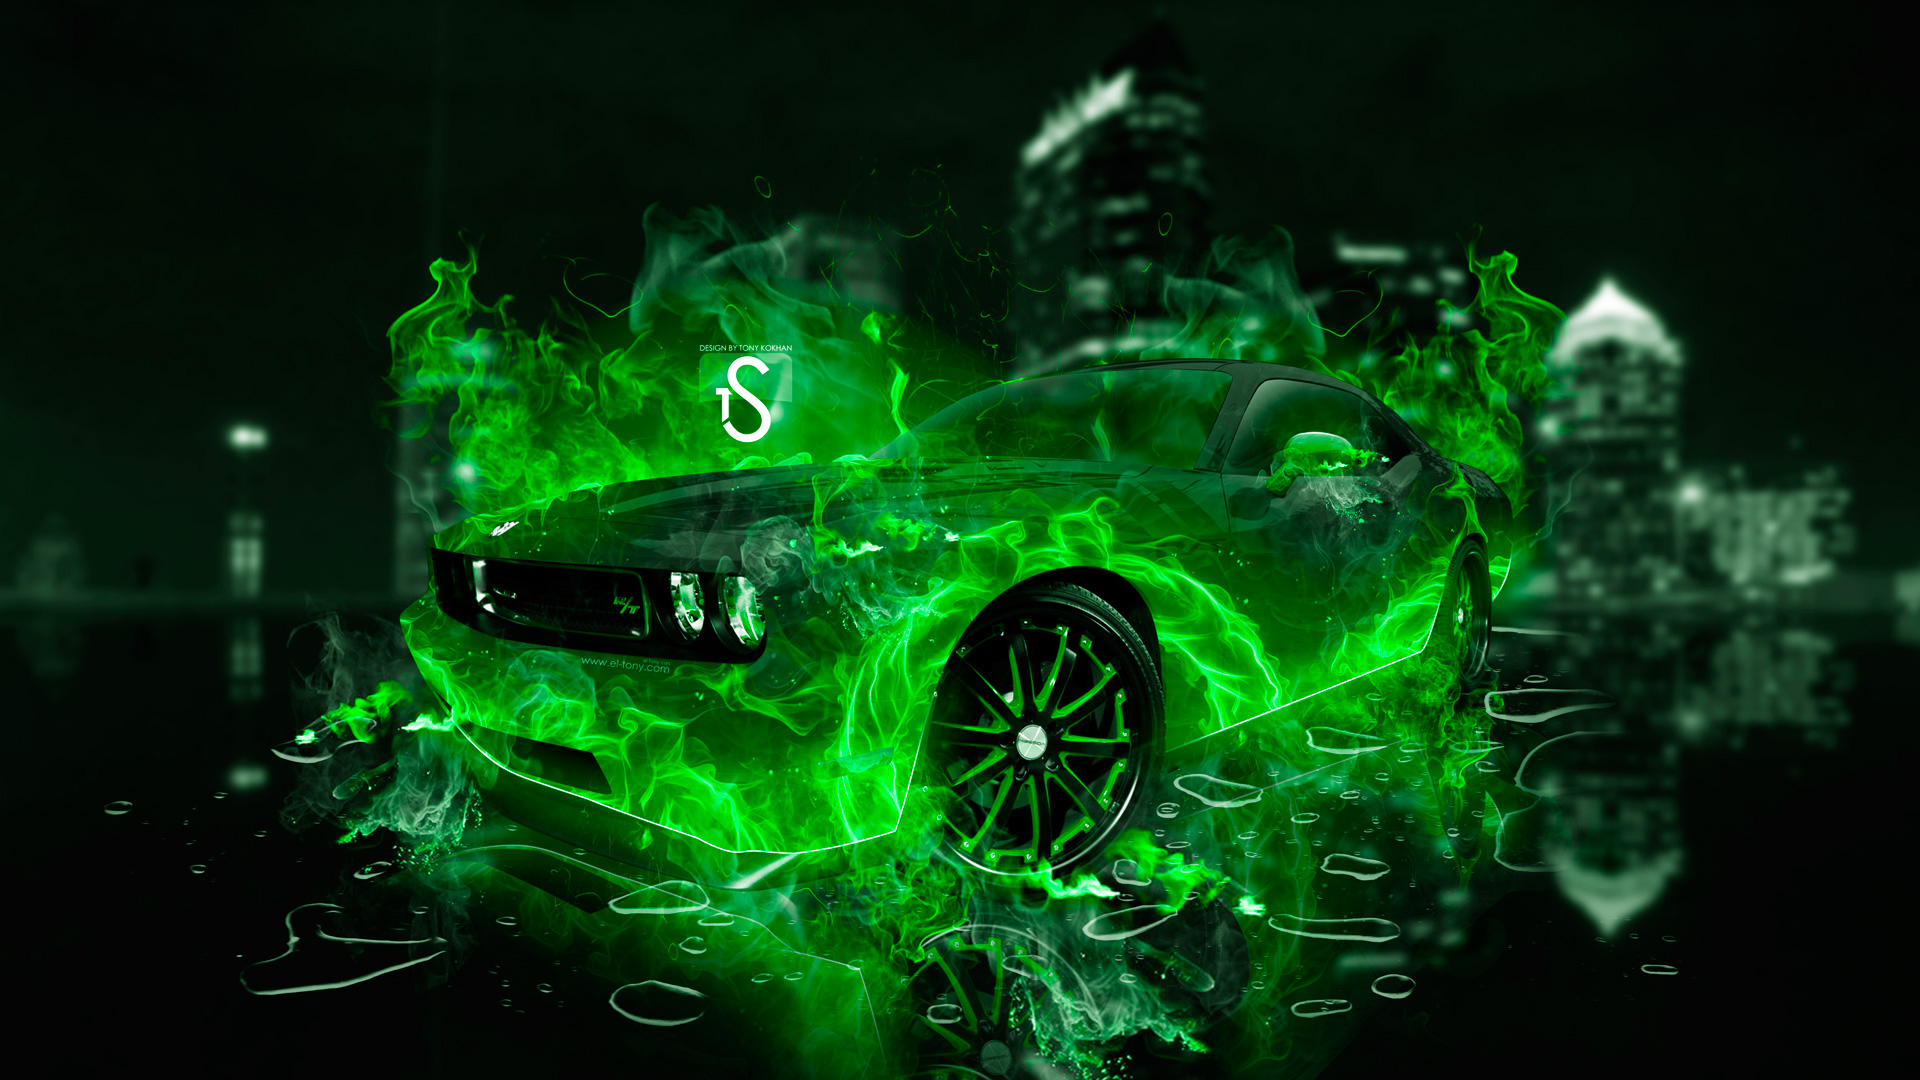 Free download Dodge Challenger Green Fire City Car 2014 HD Wallpaper design by Tony [1920x1080] for your Desktop, Mobile & Tablet. Explore Car Wallpaper for Fire. Cool Fire Wallpaper